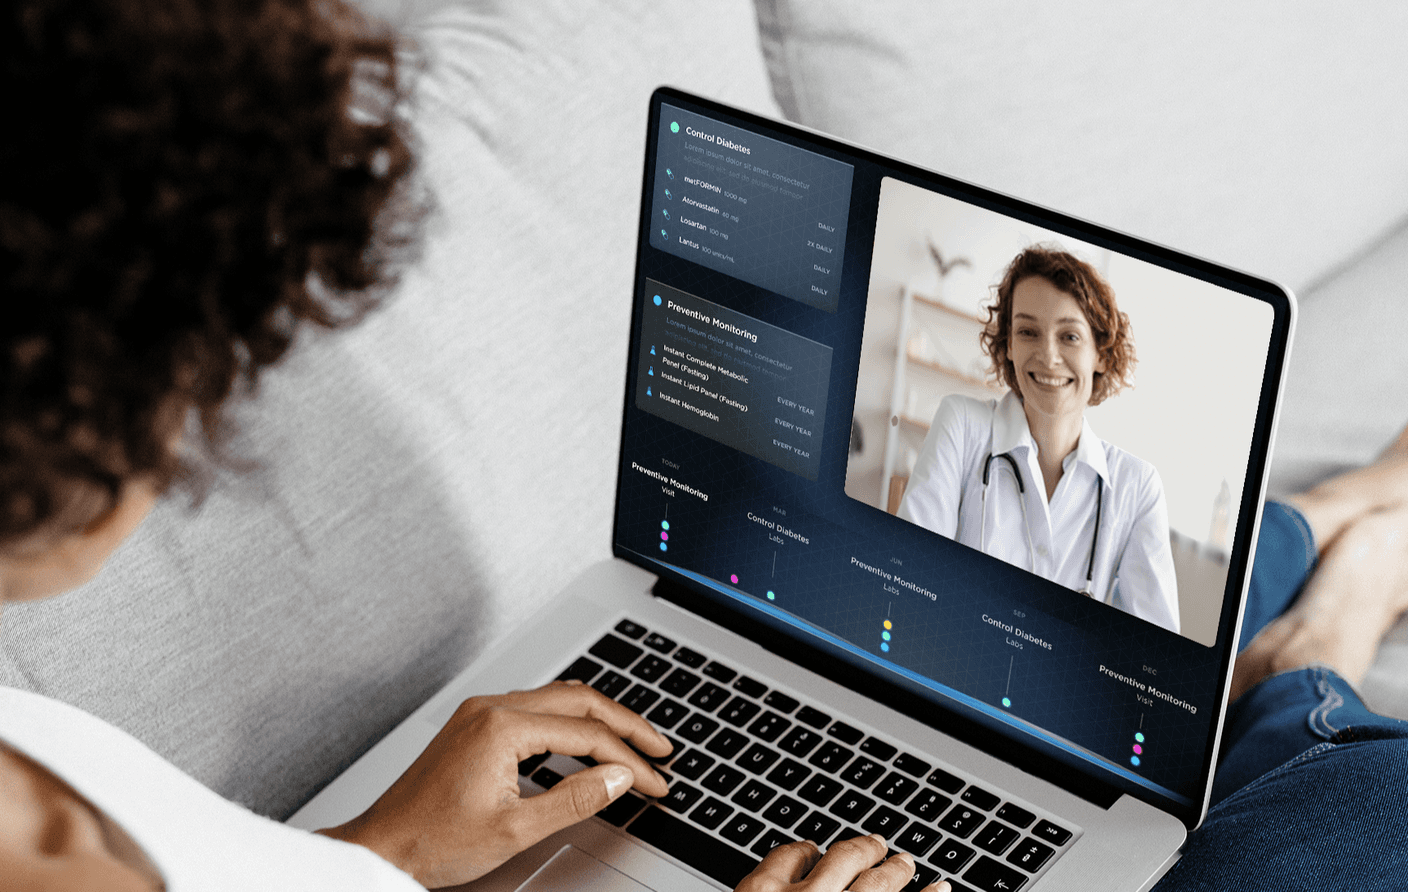 Image showing person holding laptop with a virtual doctors visit taking place. The doctor is displayed in the top right corner, and data is shown on the rest of the screen.